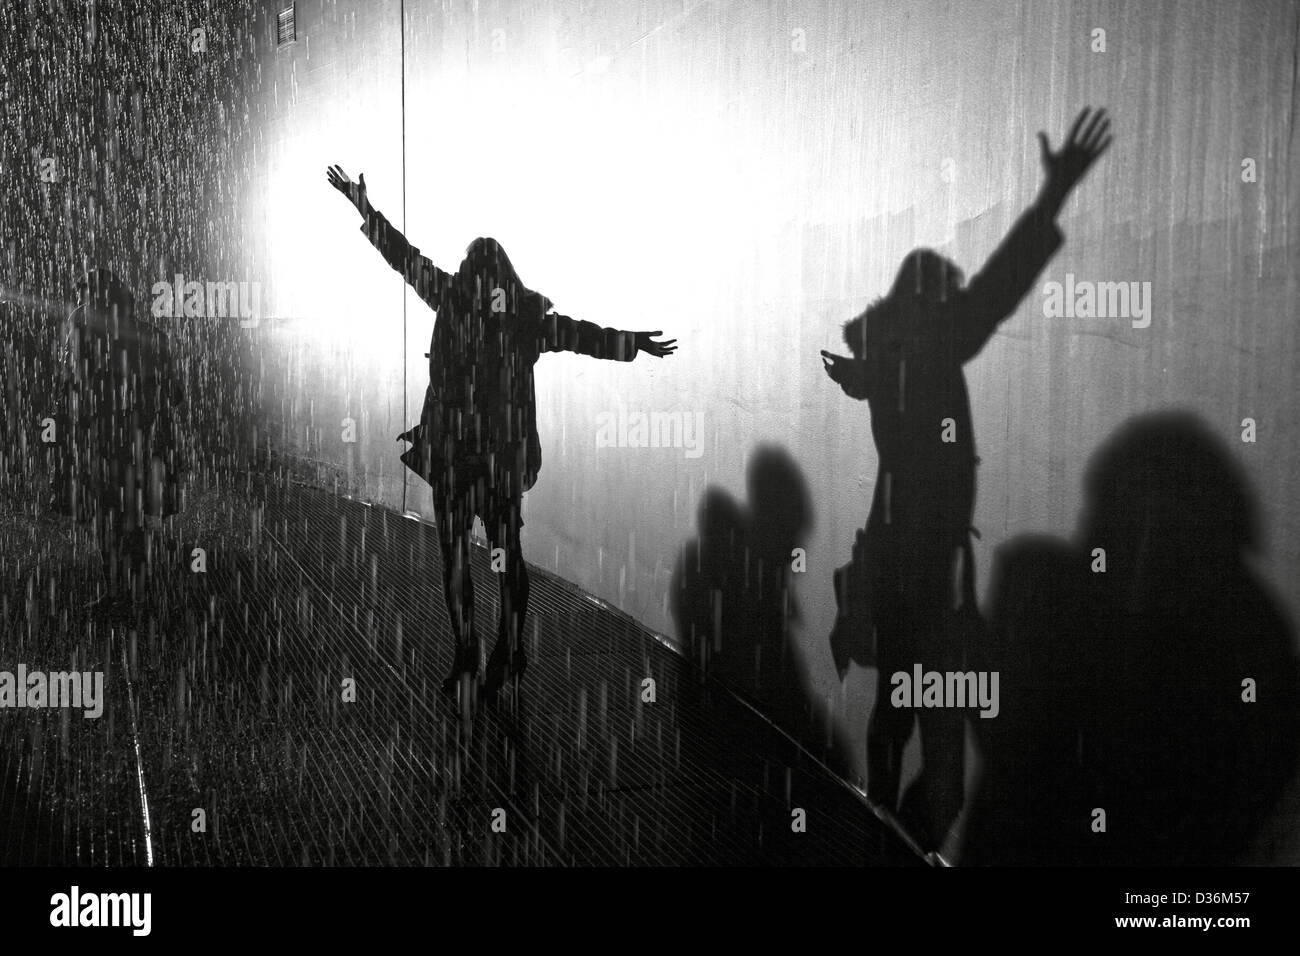 shadow of silhouette woman in the rain with arms open and outstretched enjoying the rain Stock Photo